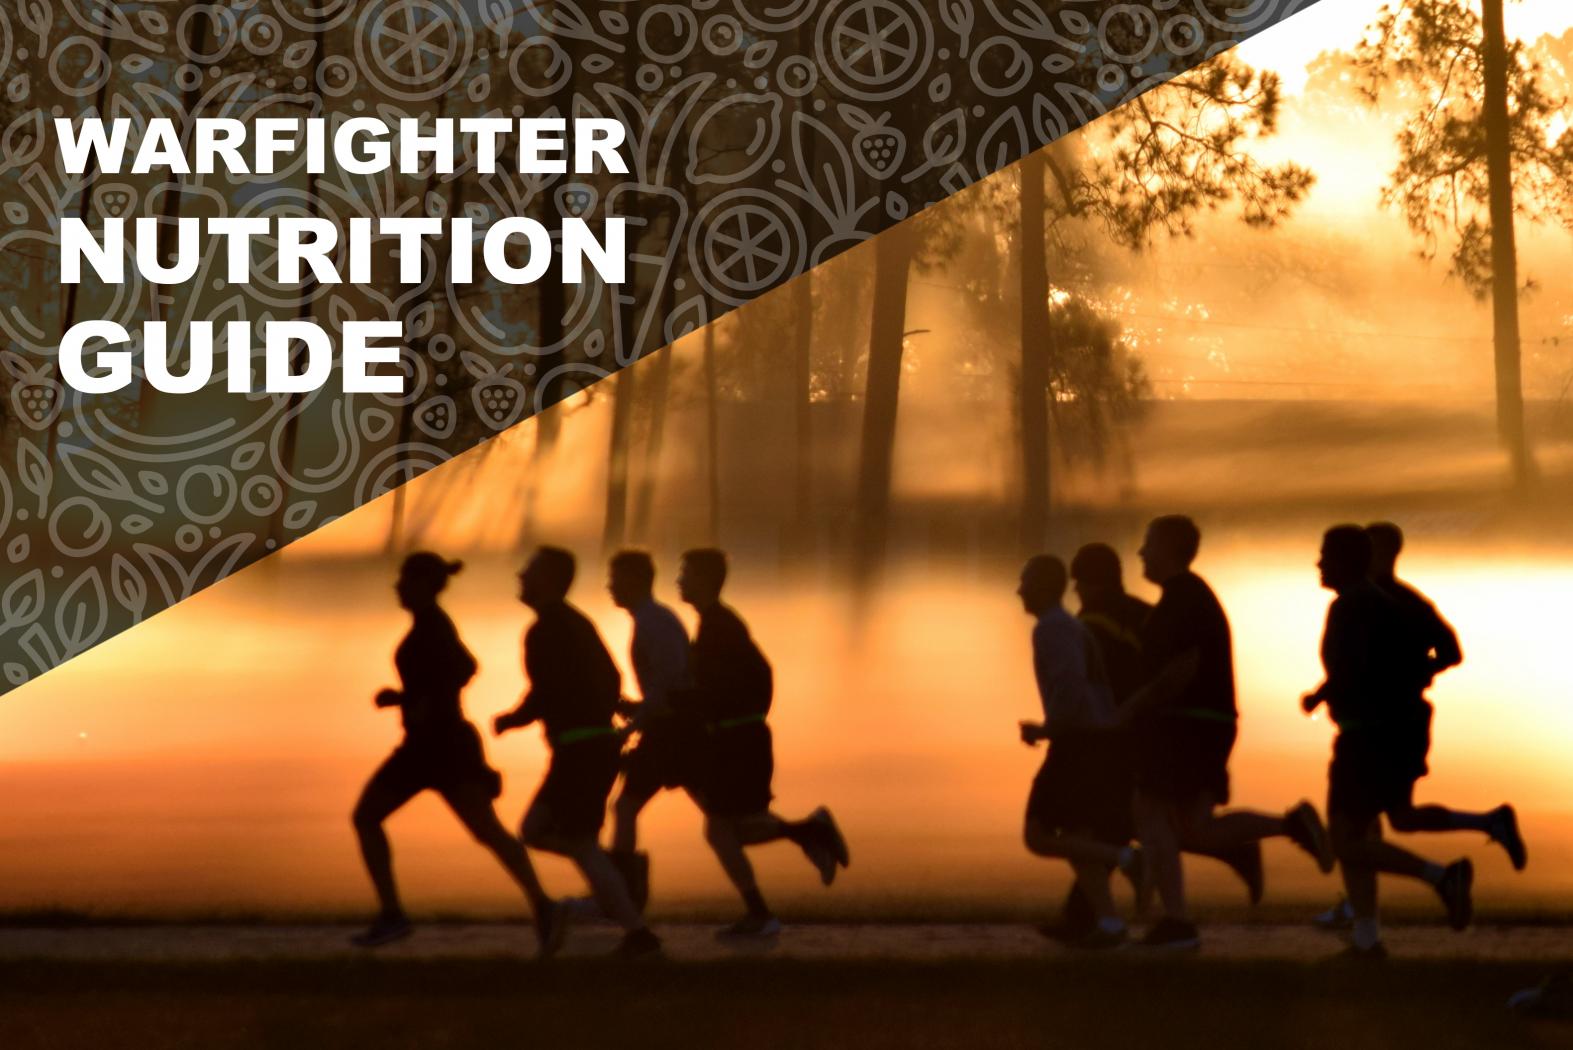 Warfighter Nutrition Guide. Silhouette of people running at sunrise.